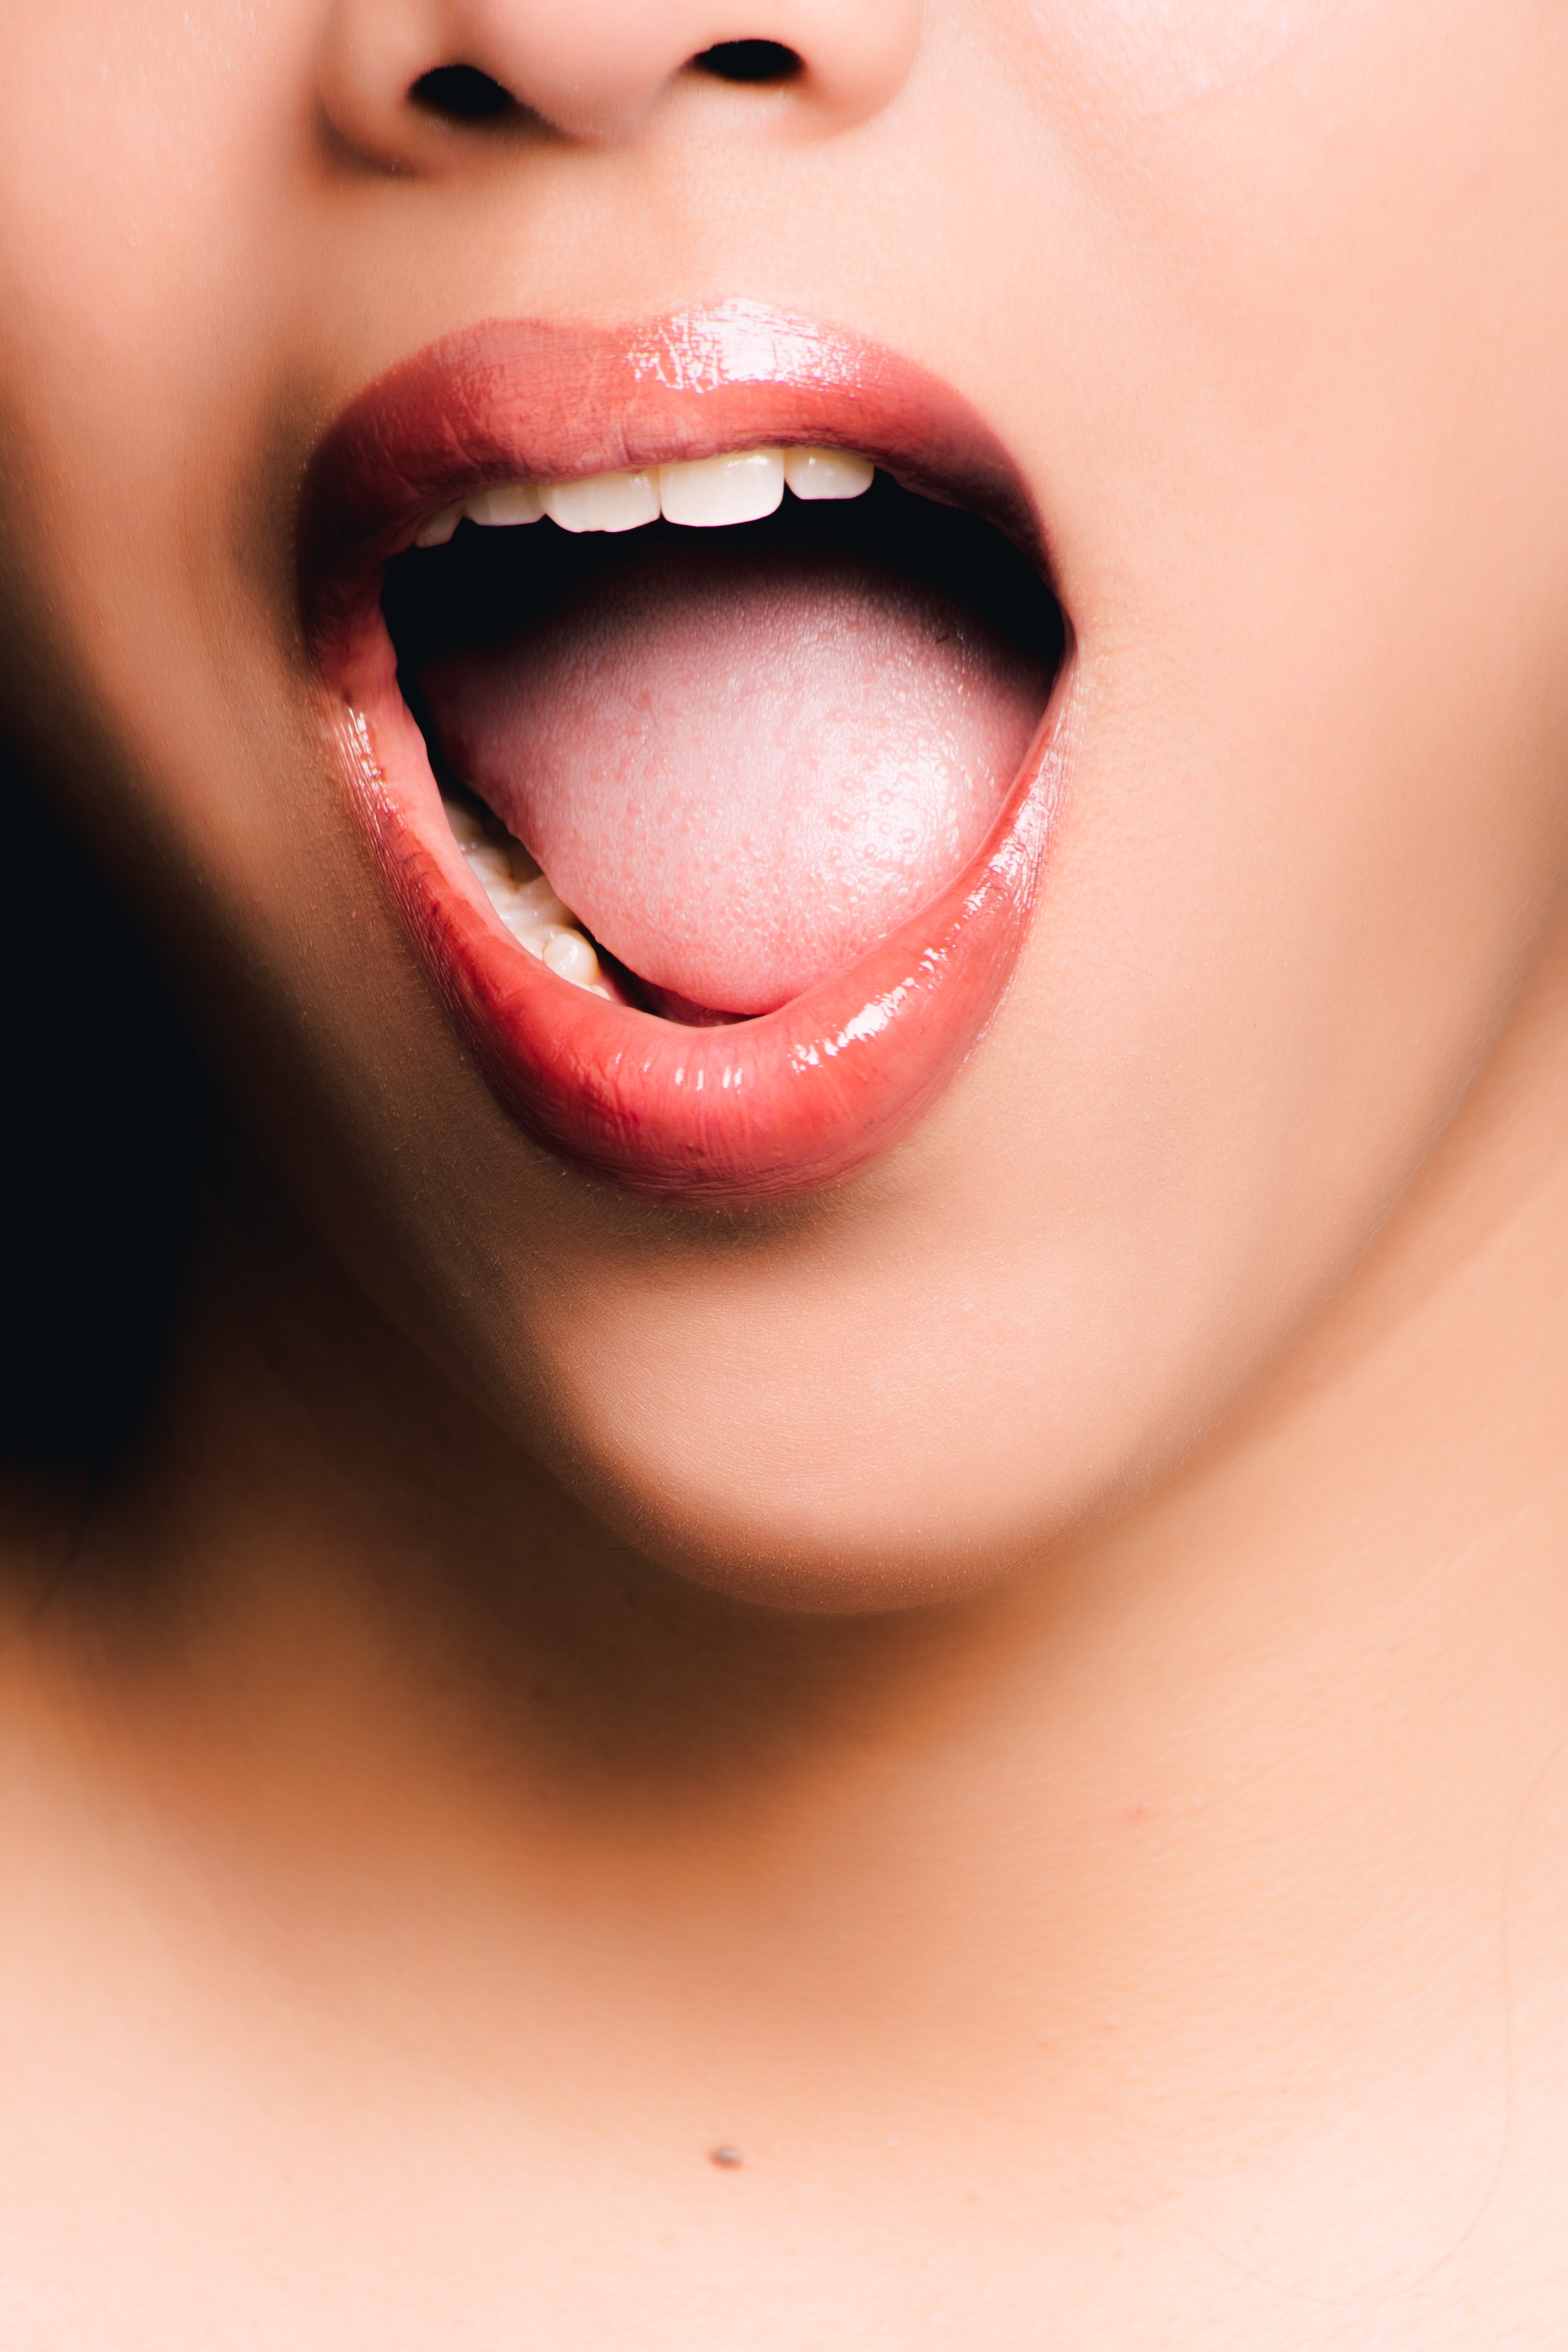 What Your Tongue Says About Your Health (Become a Member for Access)